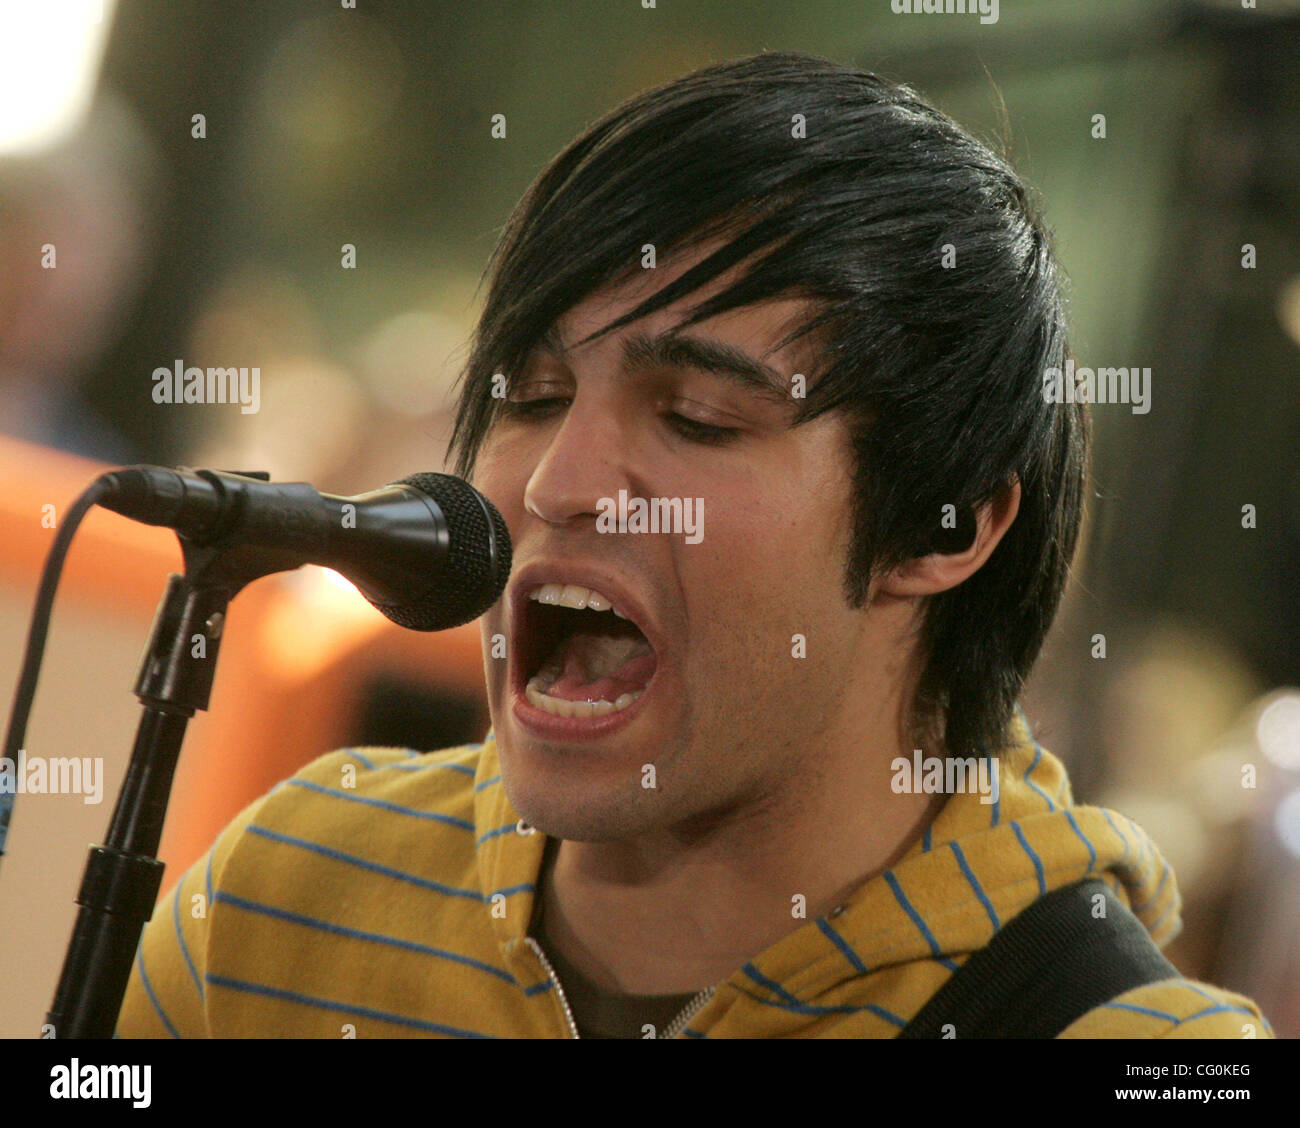 Jul 06, 2007 - New York, NY, USA -Bass guitarist PETE WENTZ, from the band  'Fall Out Boy', performs at the 'Today' show 2007 Summer Concert Series  held at Rockefeller Plaza. (Credit